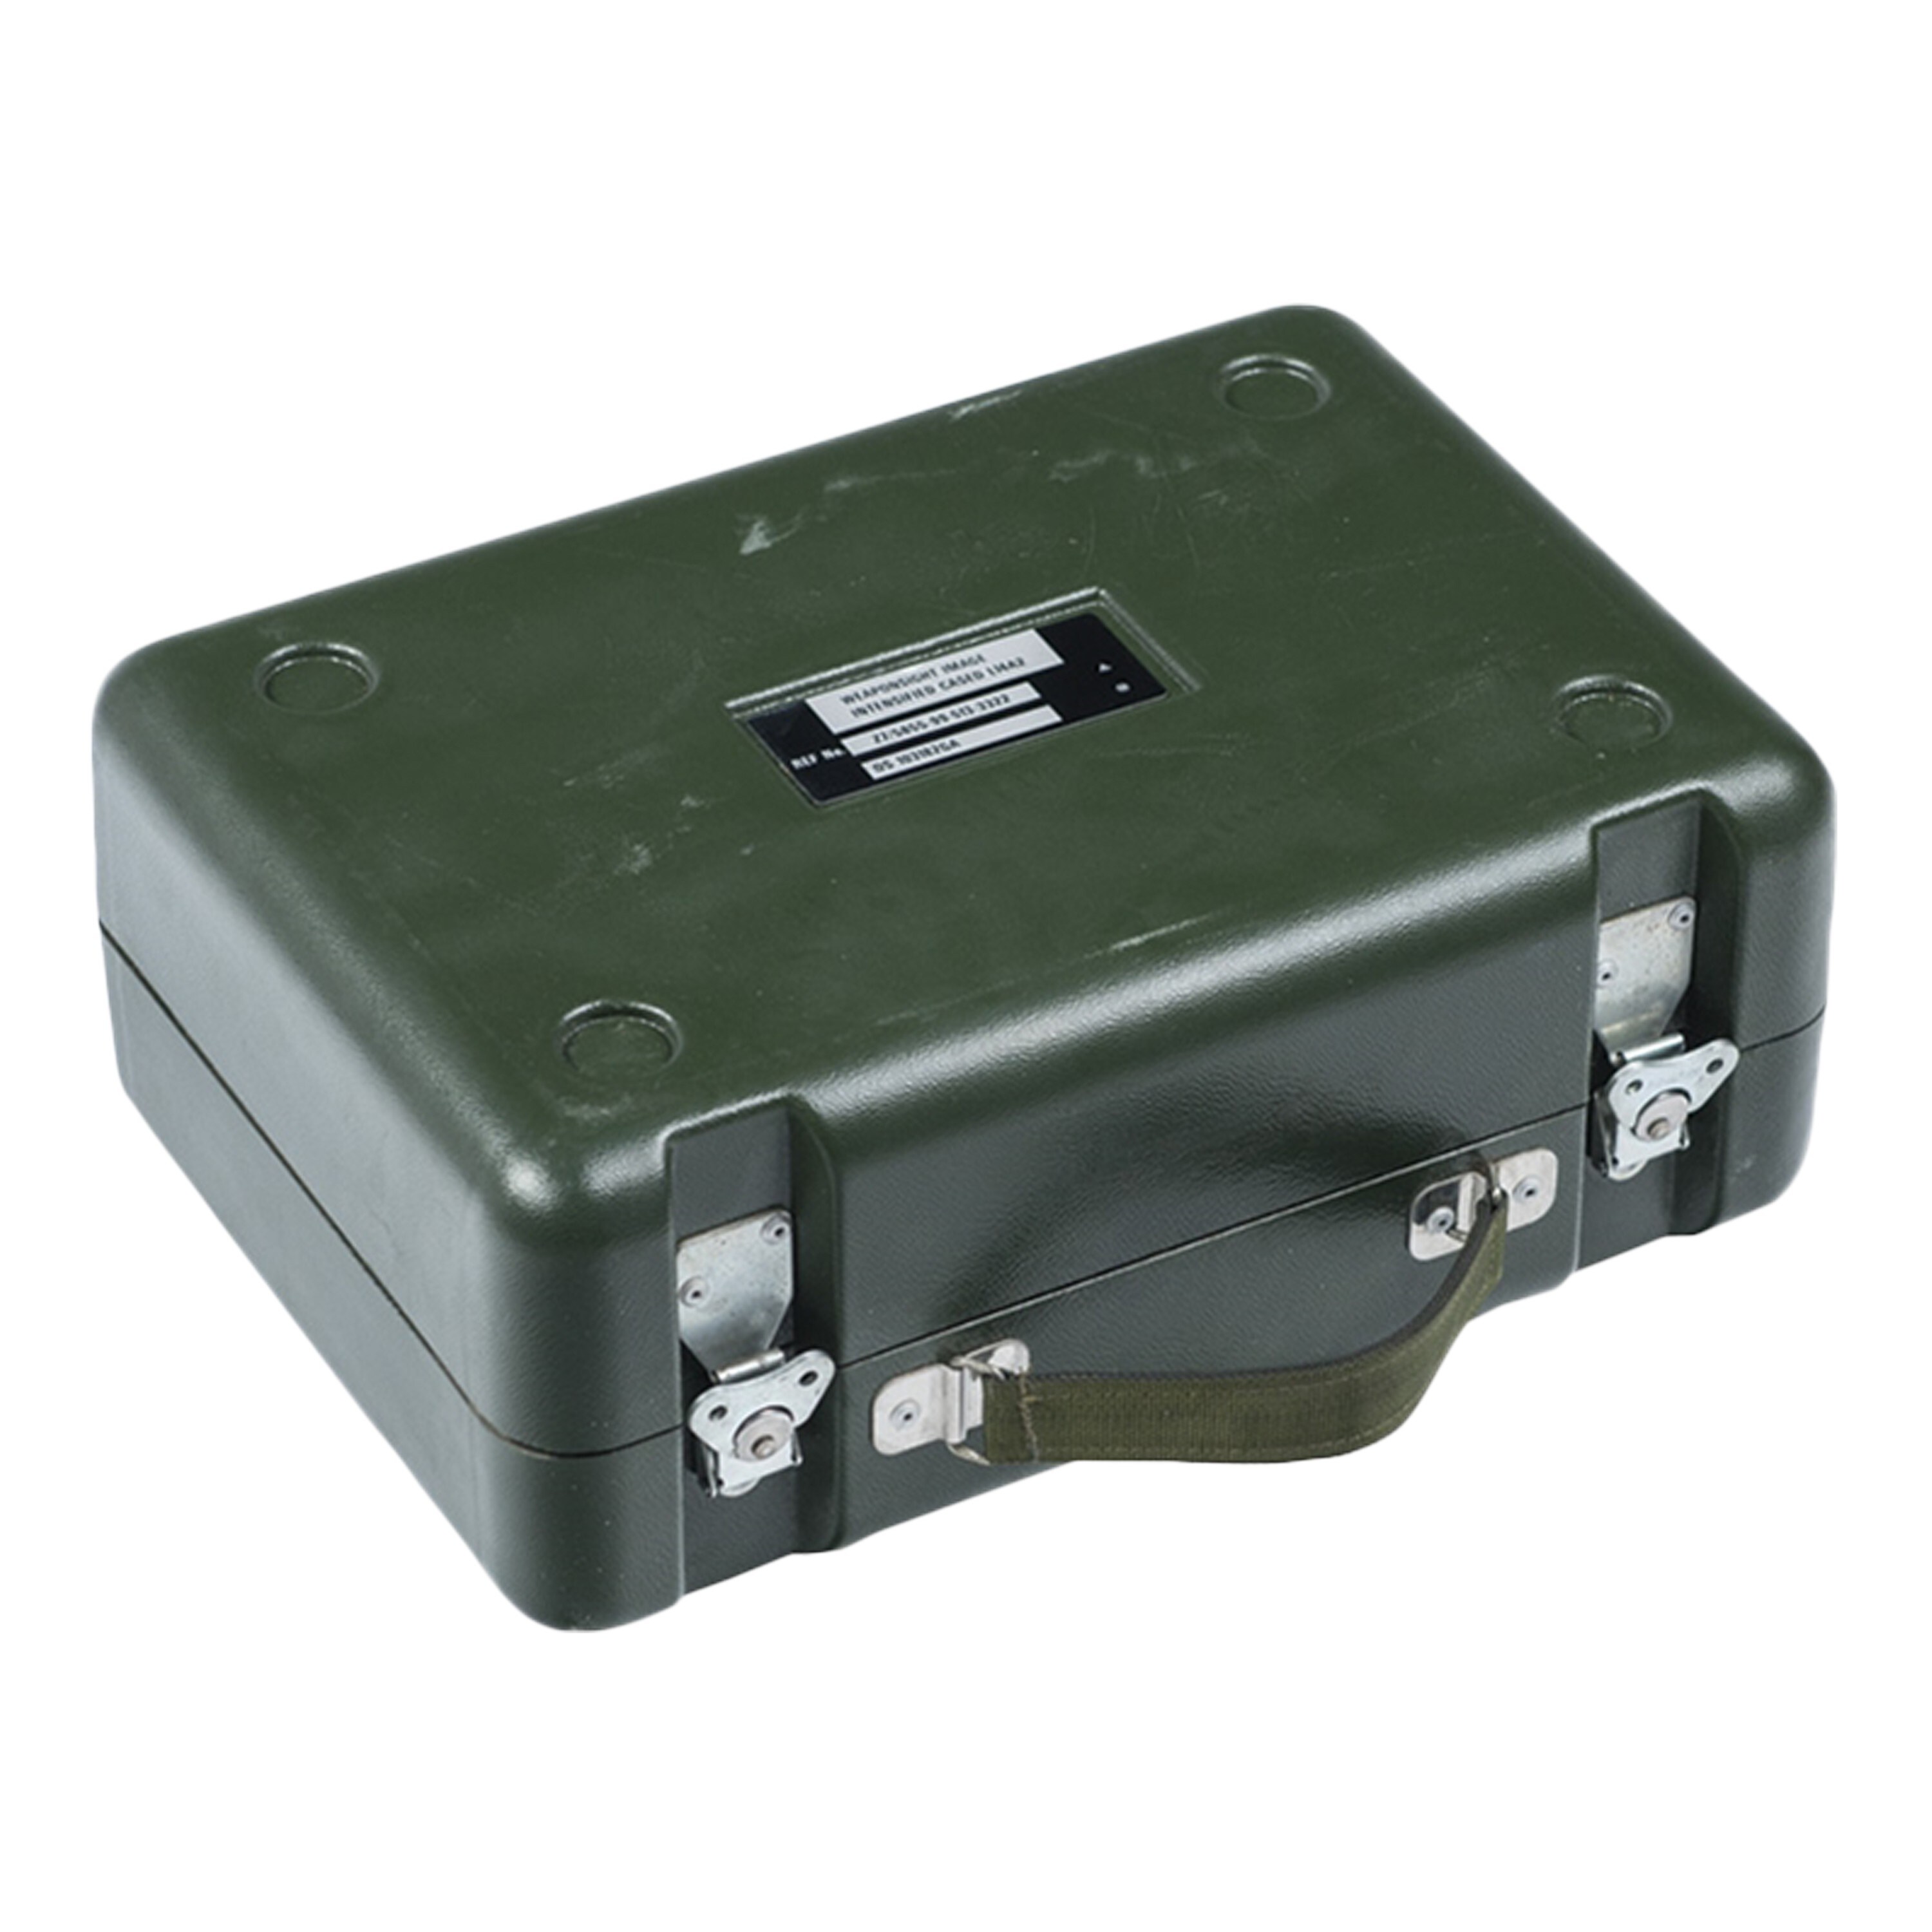 Purchase the British Transport Box Plastic Used by ASMC